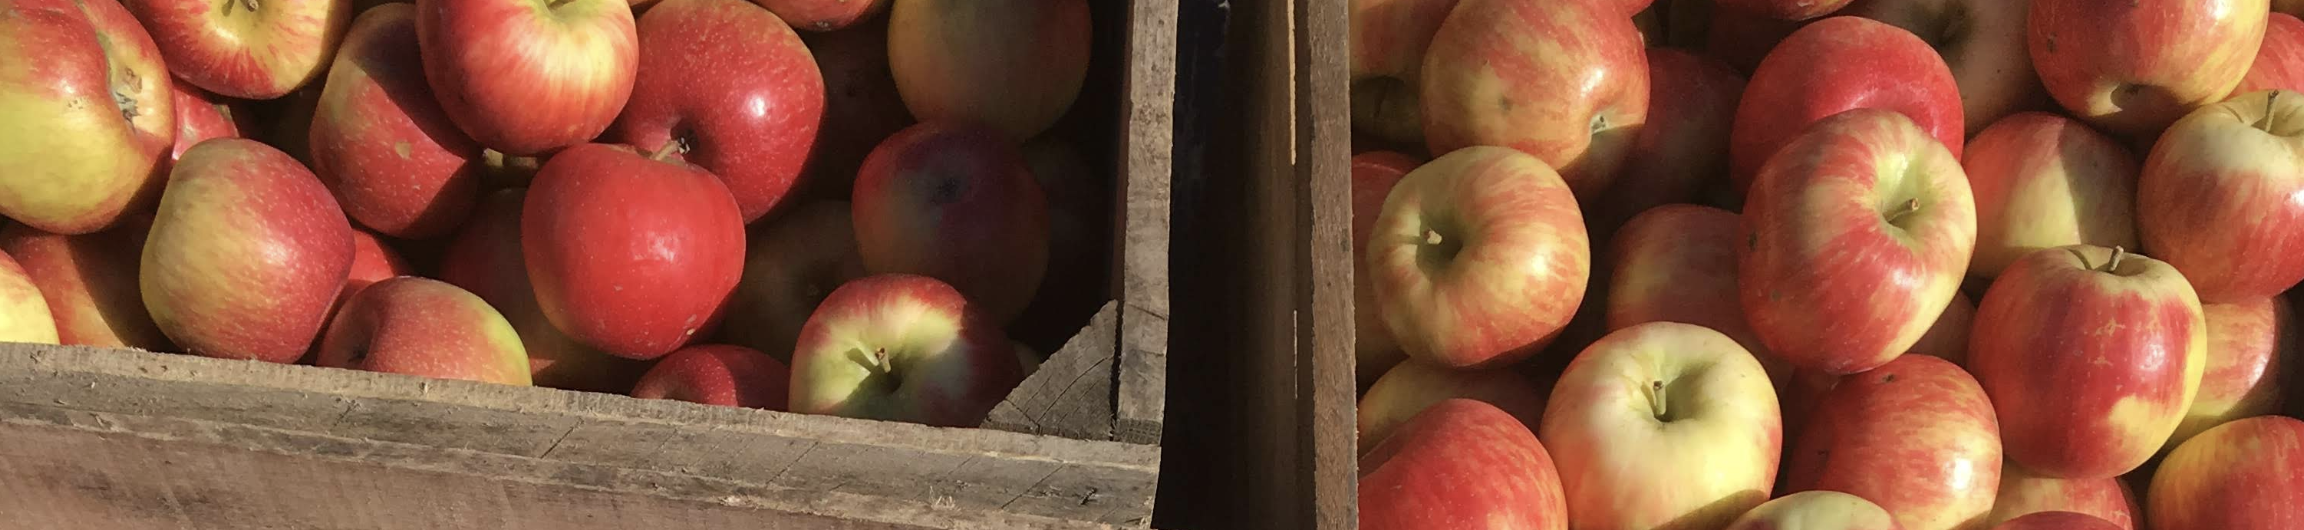 Image of apples in wooden crates